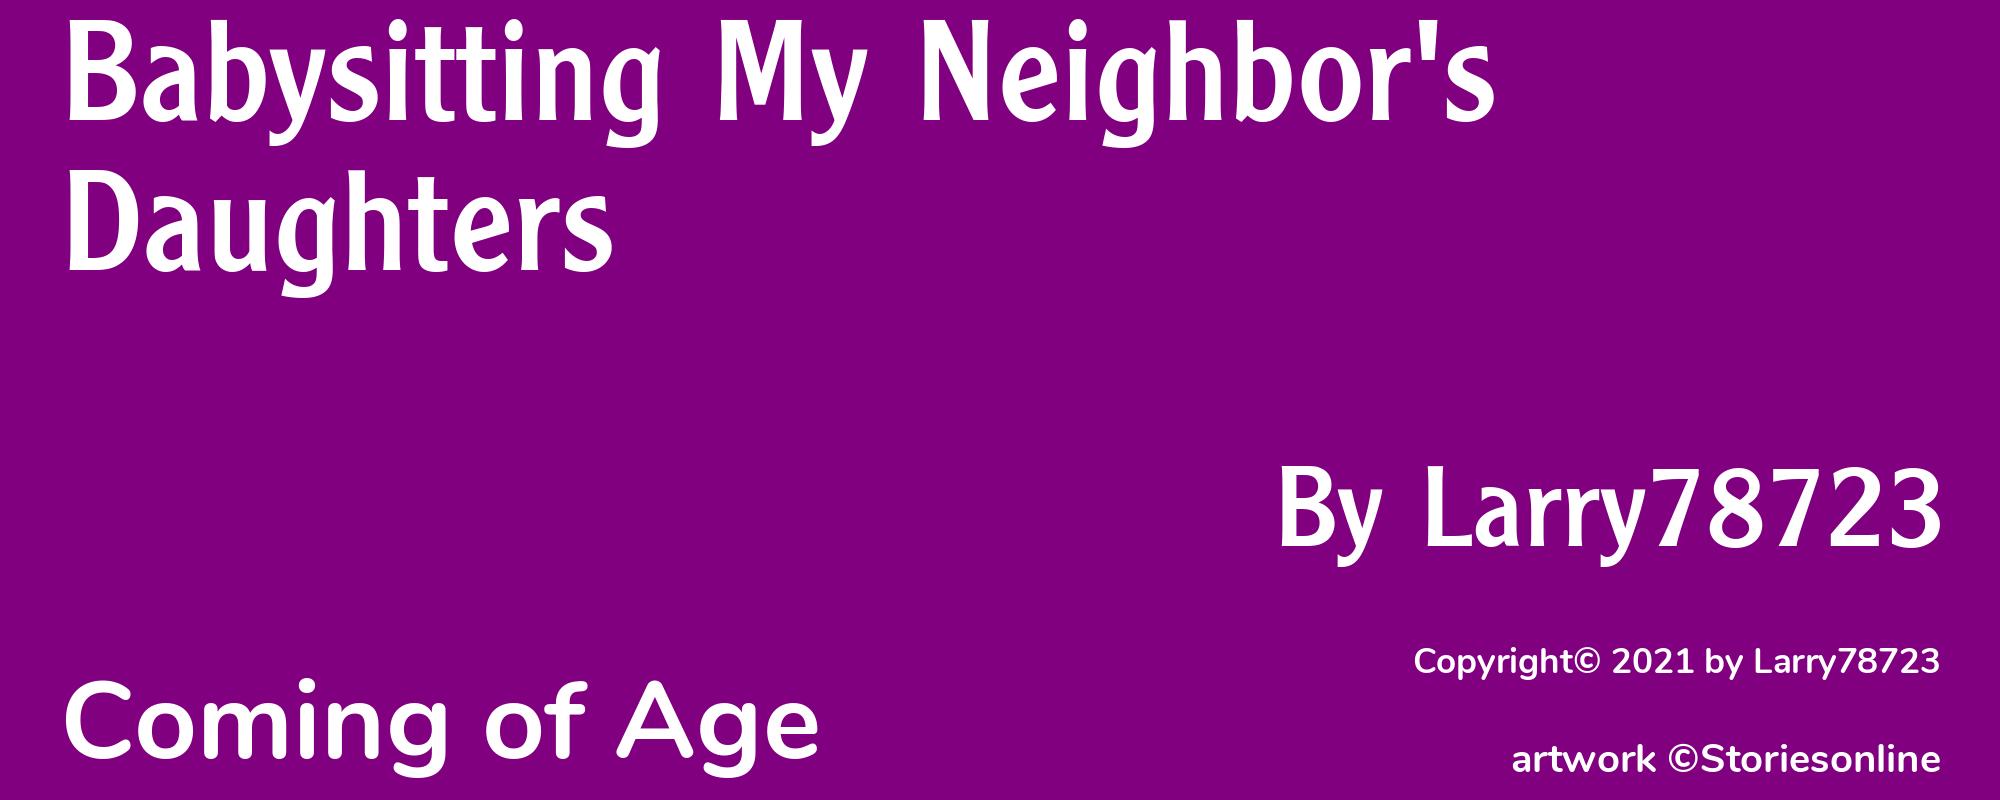 Babysitting My Neighbor's Daughters - Cover